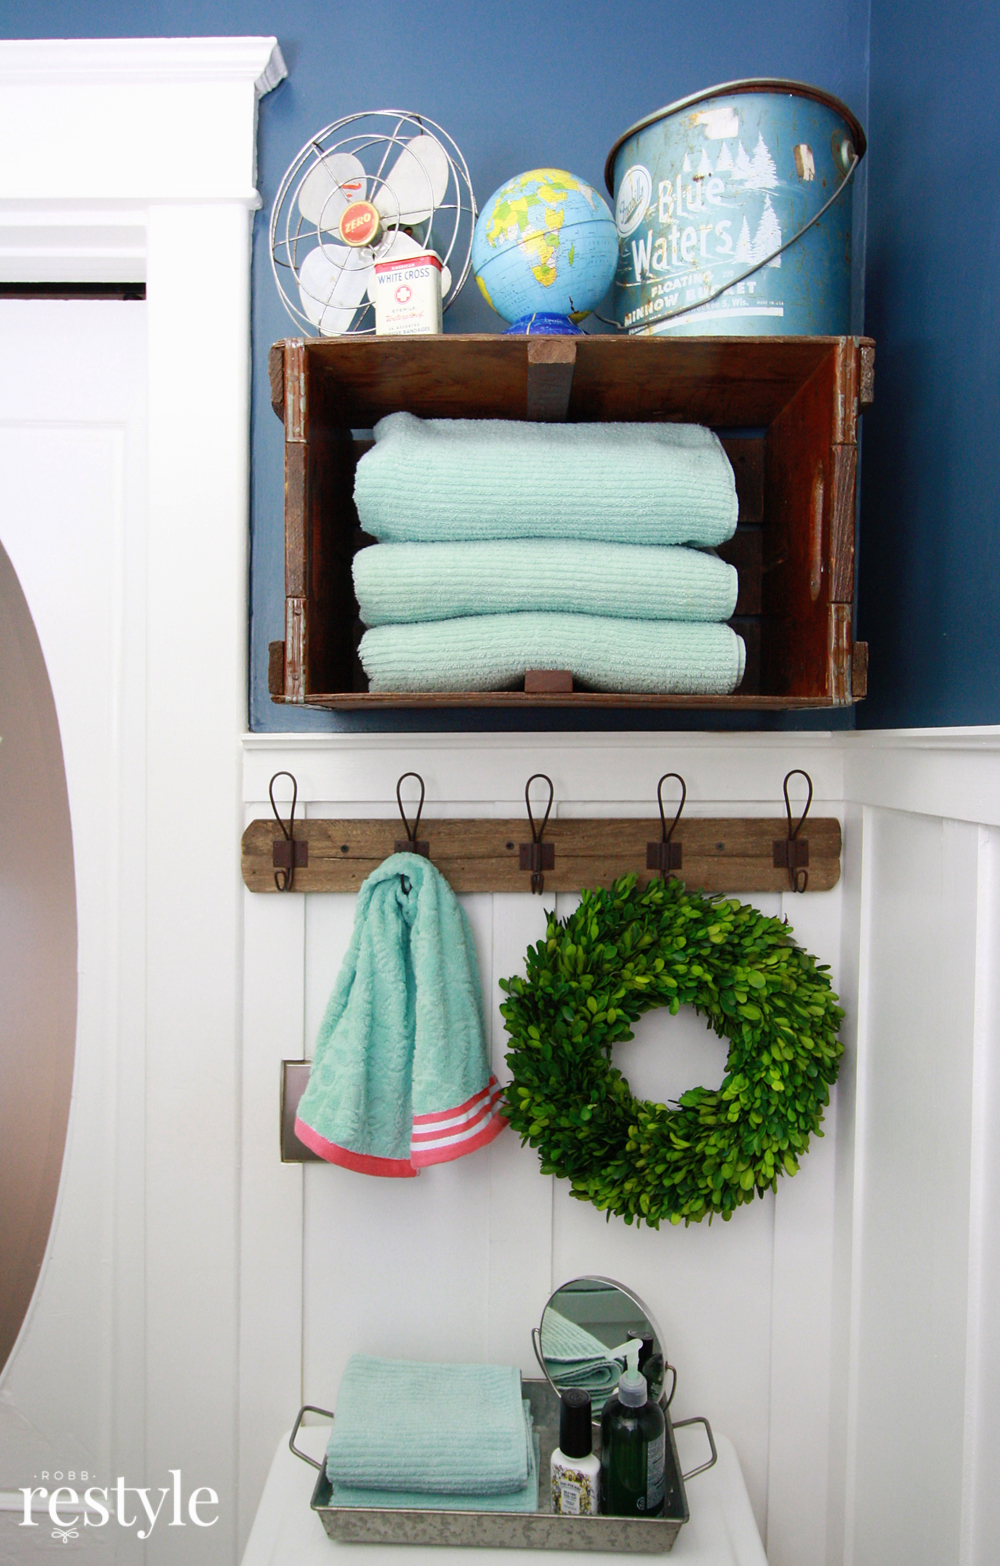 Turn a vintage crate on its side to store bathroom towels.